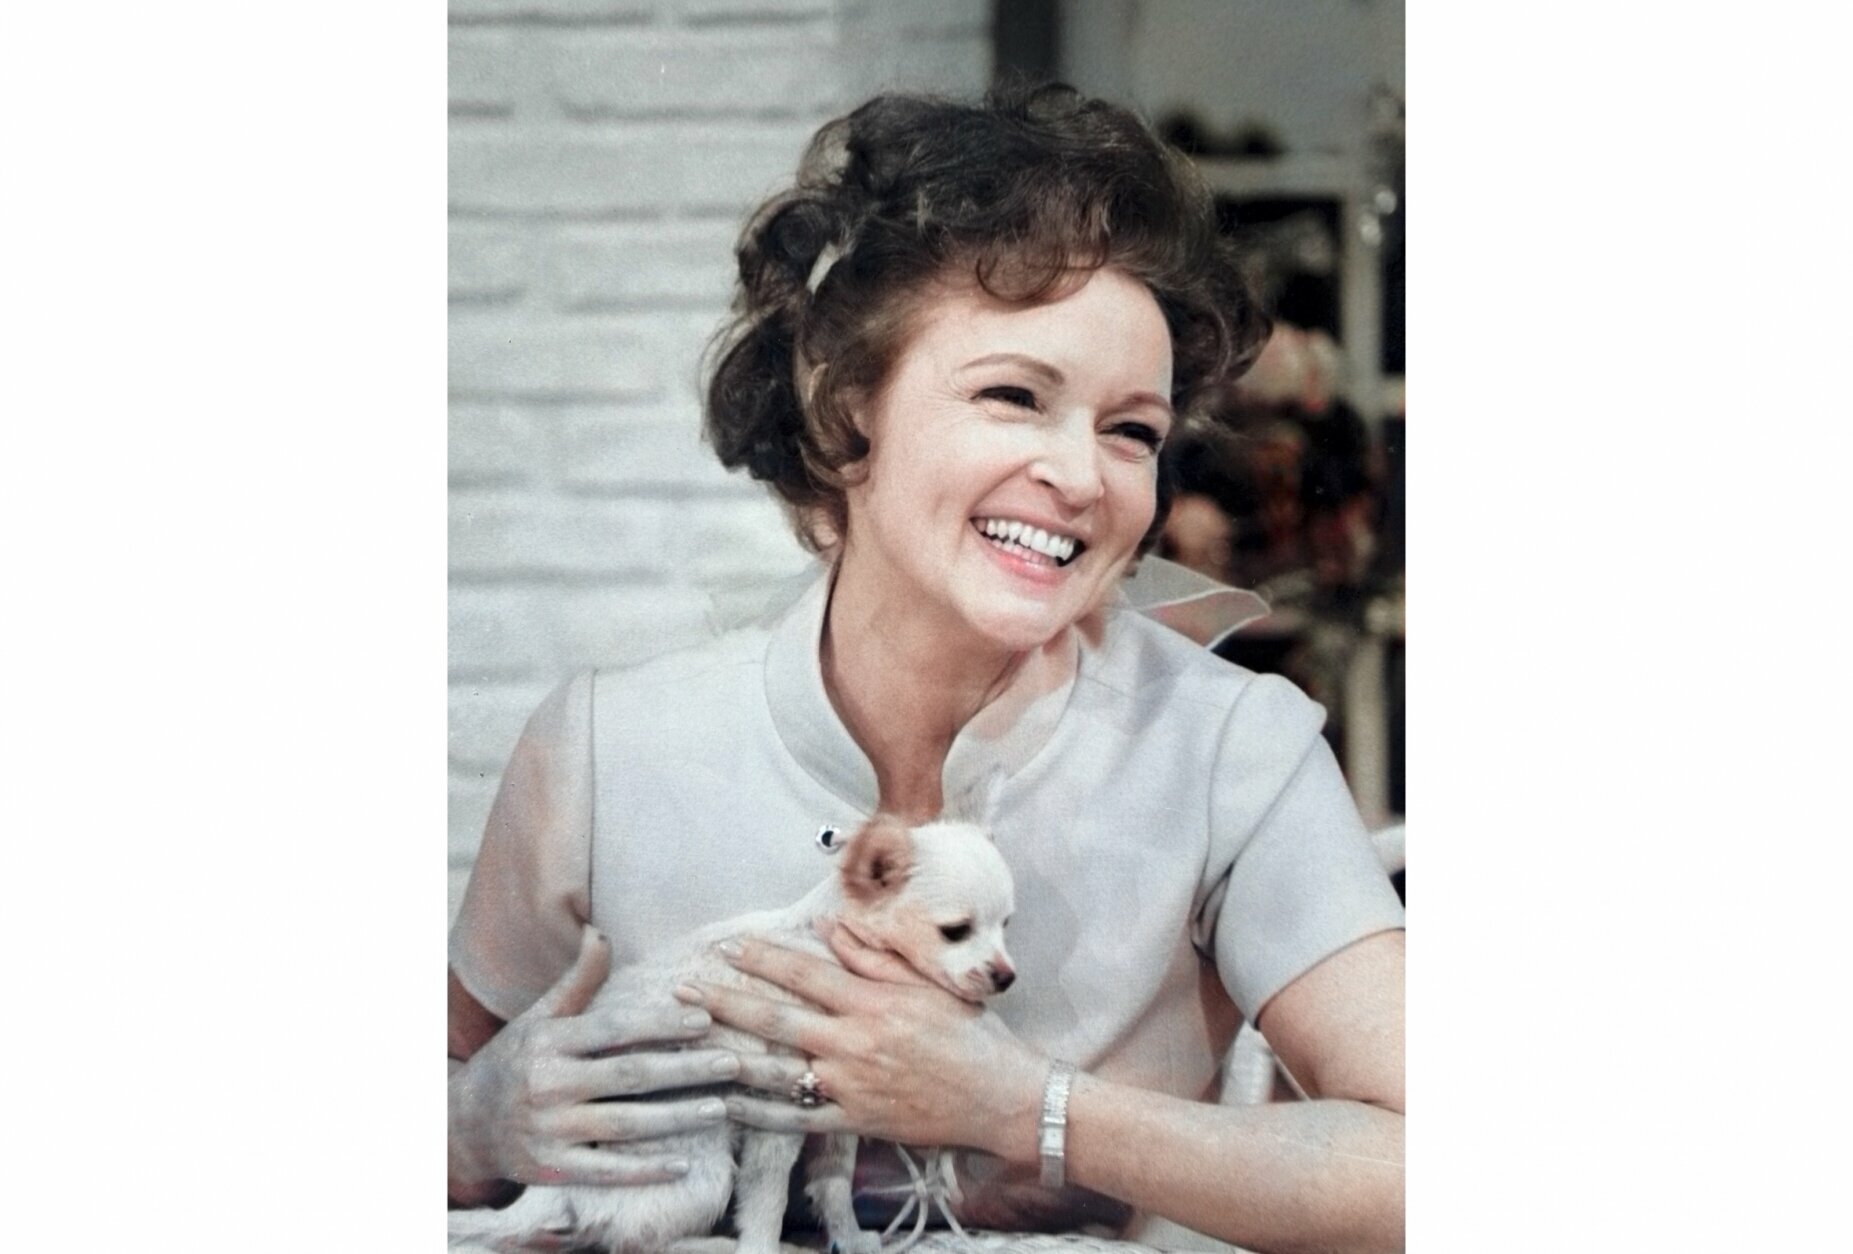 <p>This colorized image released by Margate And Chandler, Inc. shows actress and animal activist Betty White with a puppy from her 1970s series “The Pet Set.&#8221; The restored 39-episode series, renamed &#8220;Betty White’s Pet Set,” features celebrity guests Mary Tyler Moore, Carol Burnett, Burt Reynolds, James Brolin and Della Reese. (Margate And Chandler, Inc. via AP)</p>
